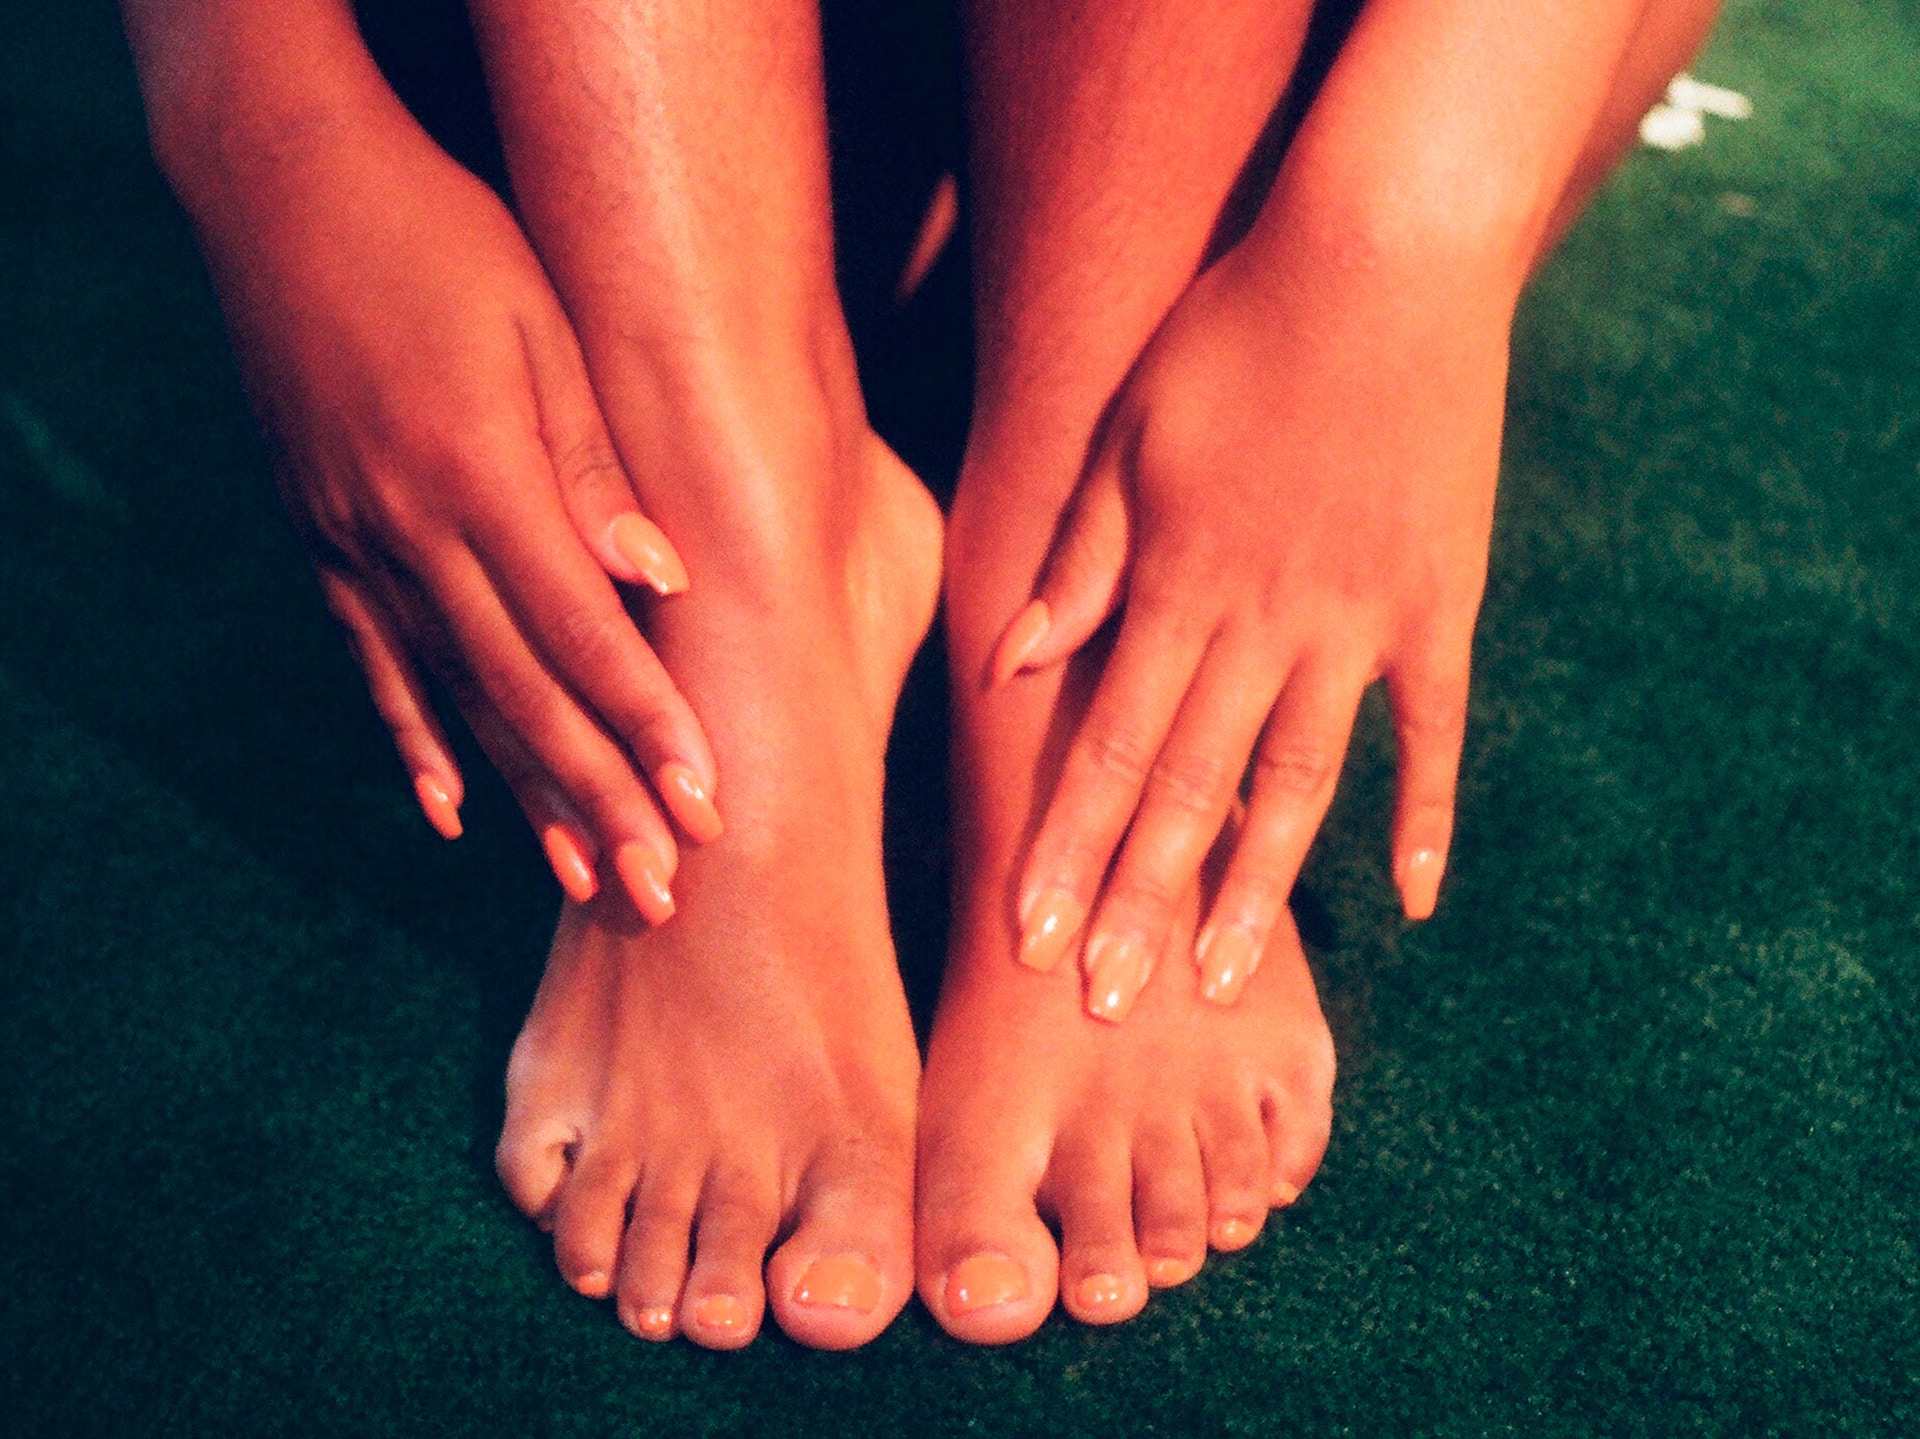 https://feetfirstclinic.com/wp-content/uploads/Medical-Pedicure-Why-Get-Them-3.jpg